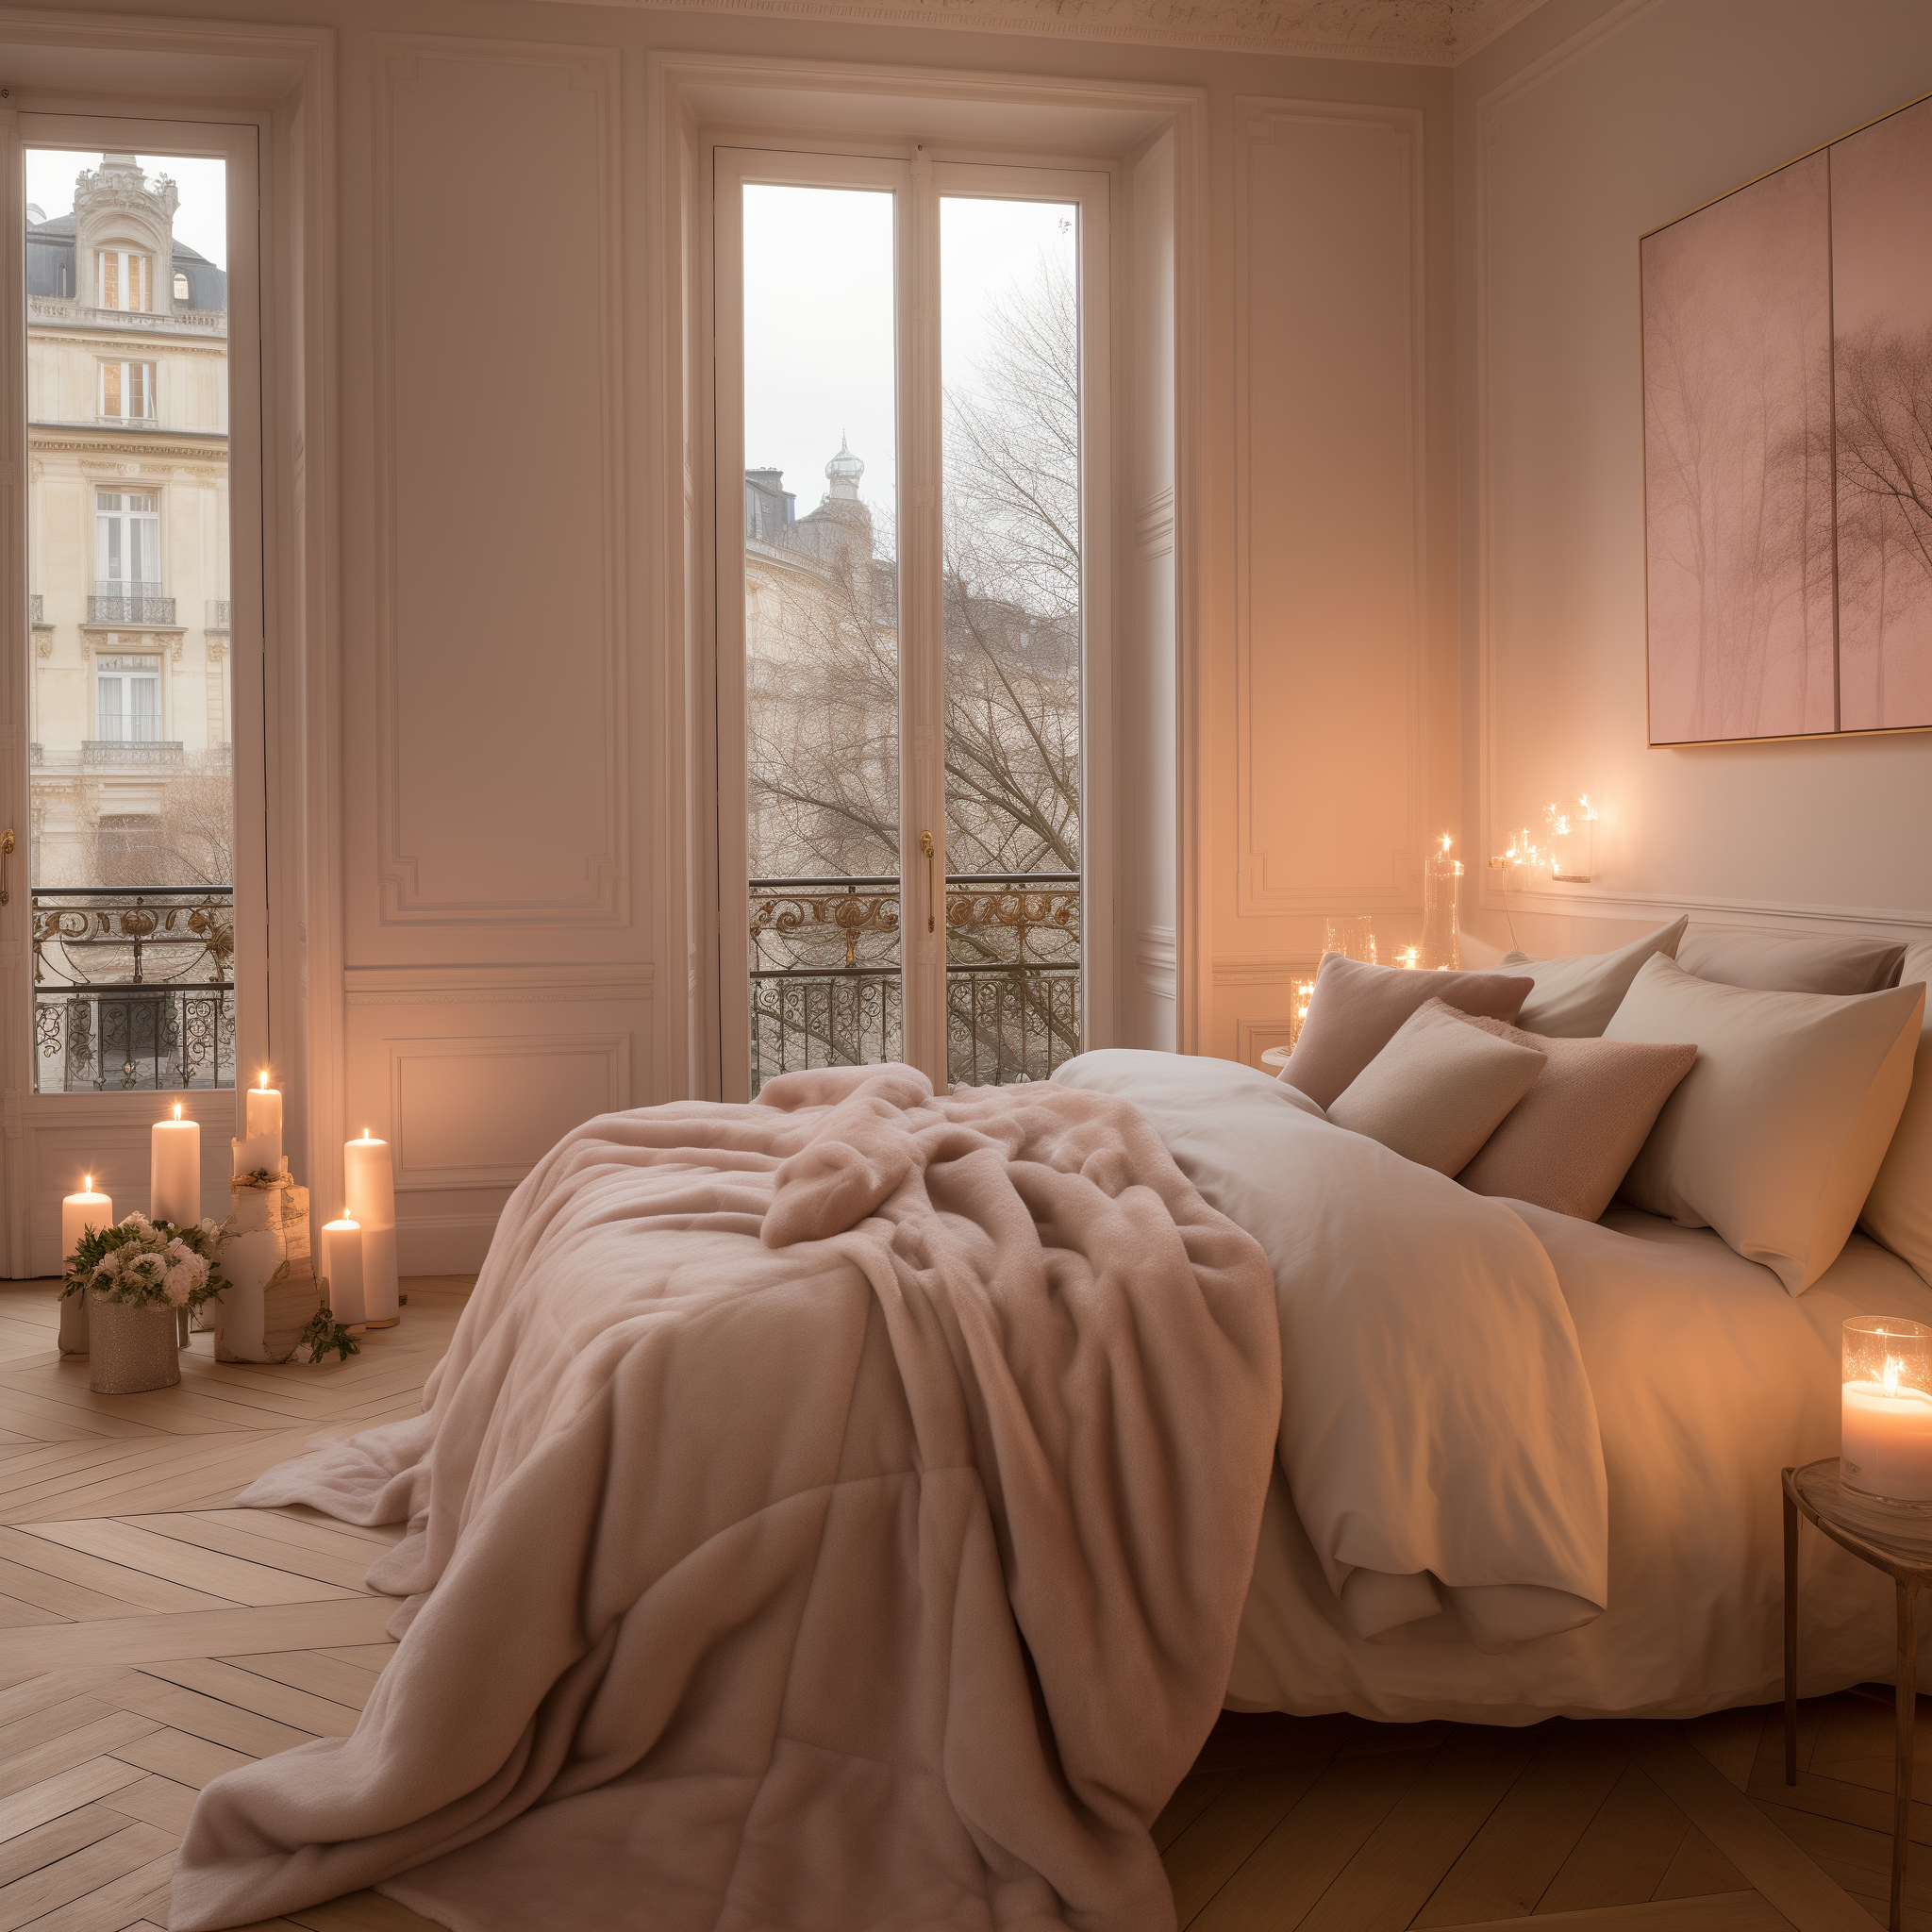 french bedroom aesthetic ideas inspiration decor for small rooms cozy interior design tall ceiling parisian